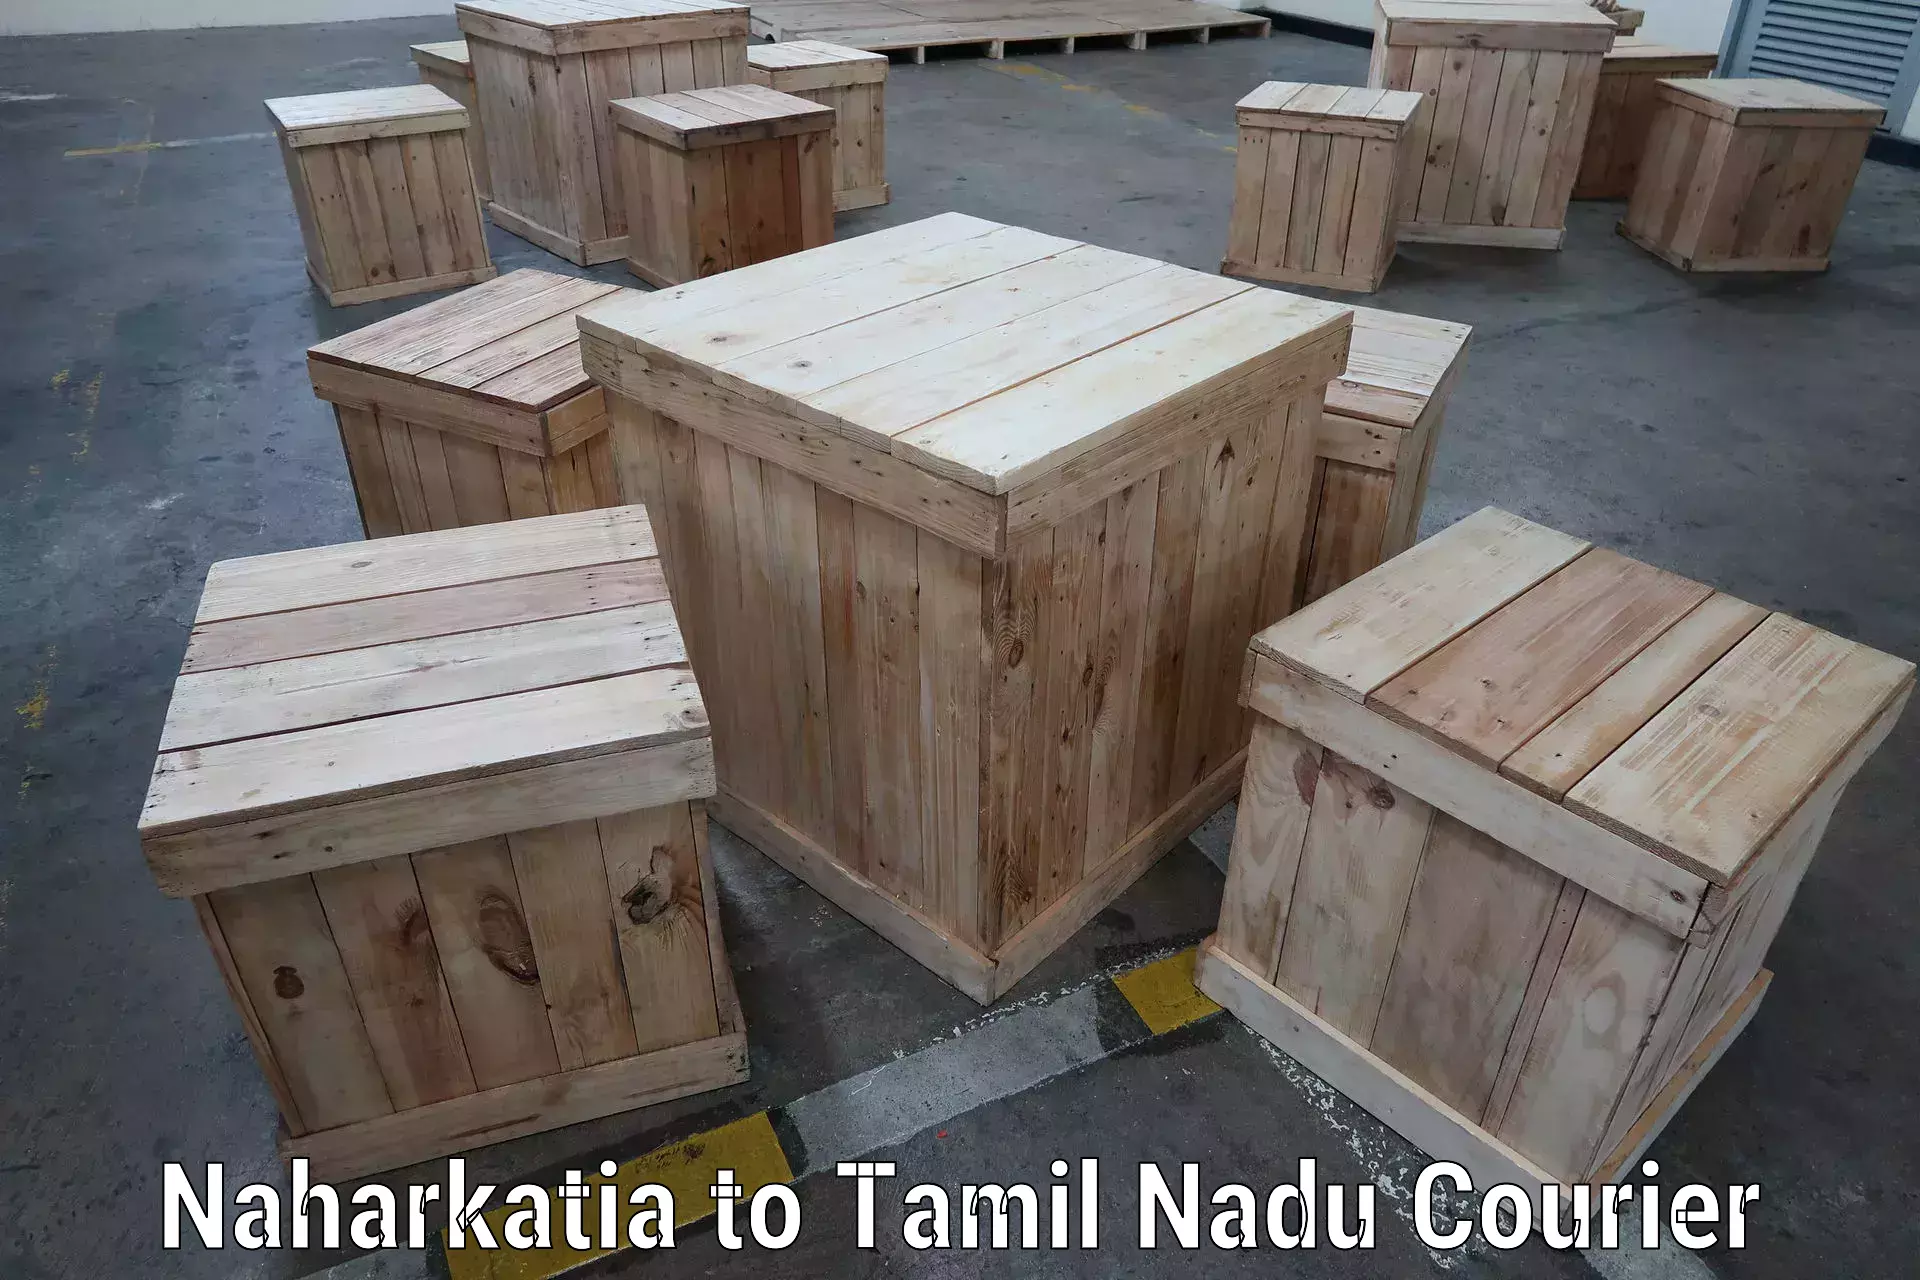 Specialized courier services in Naharkatia to Pudukkottai